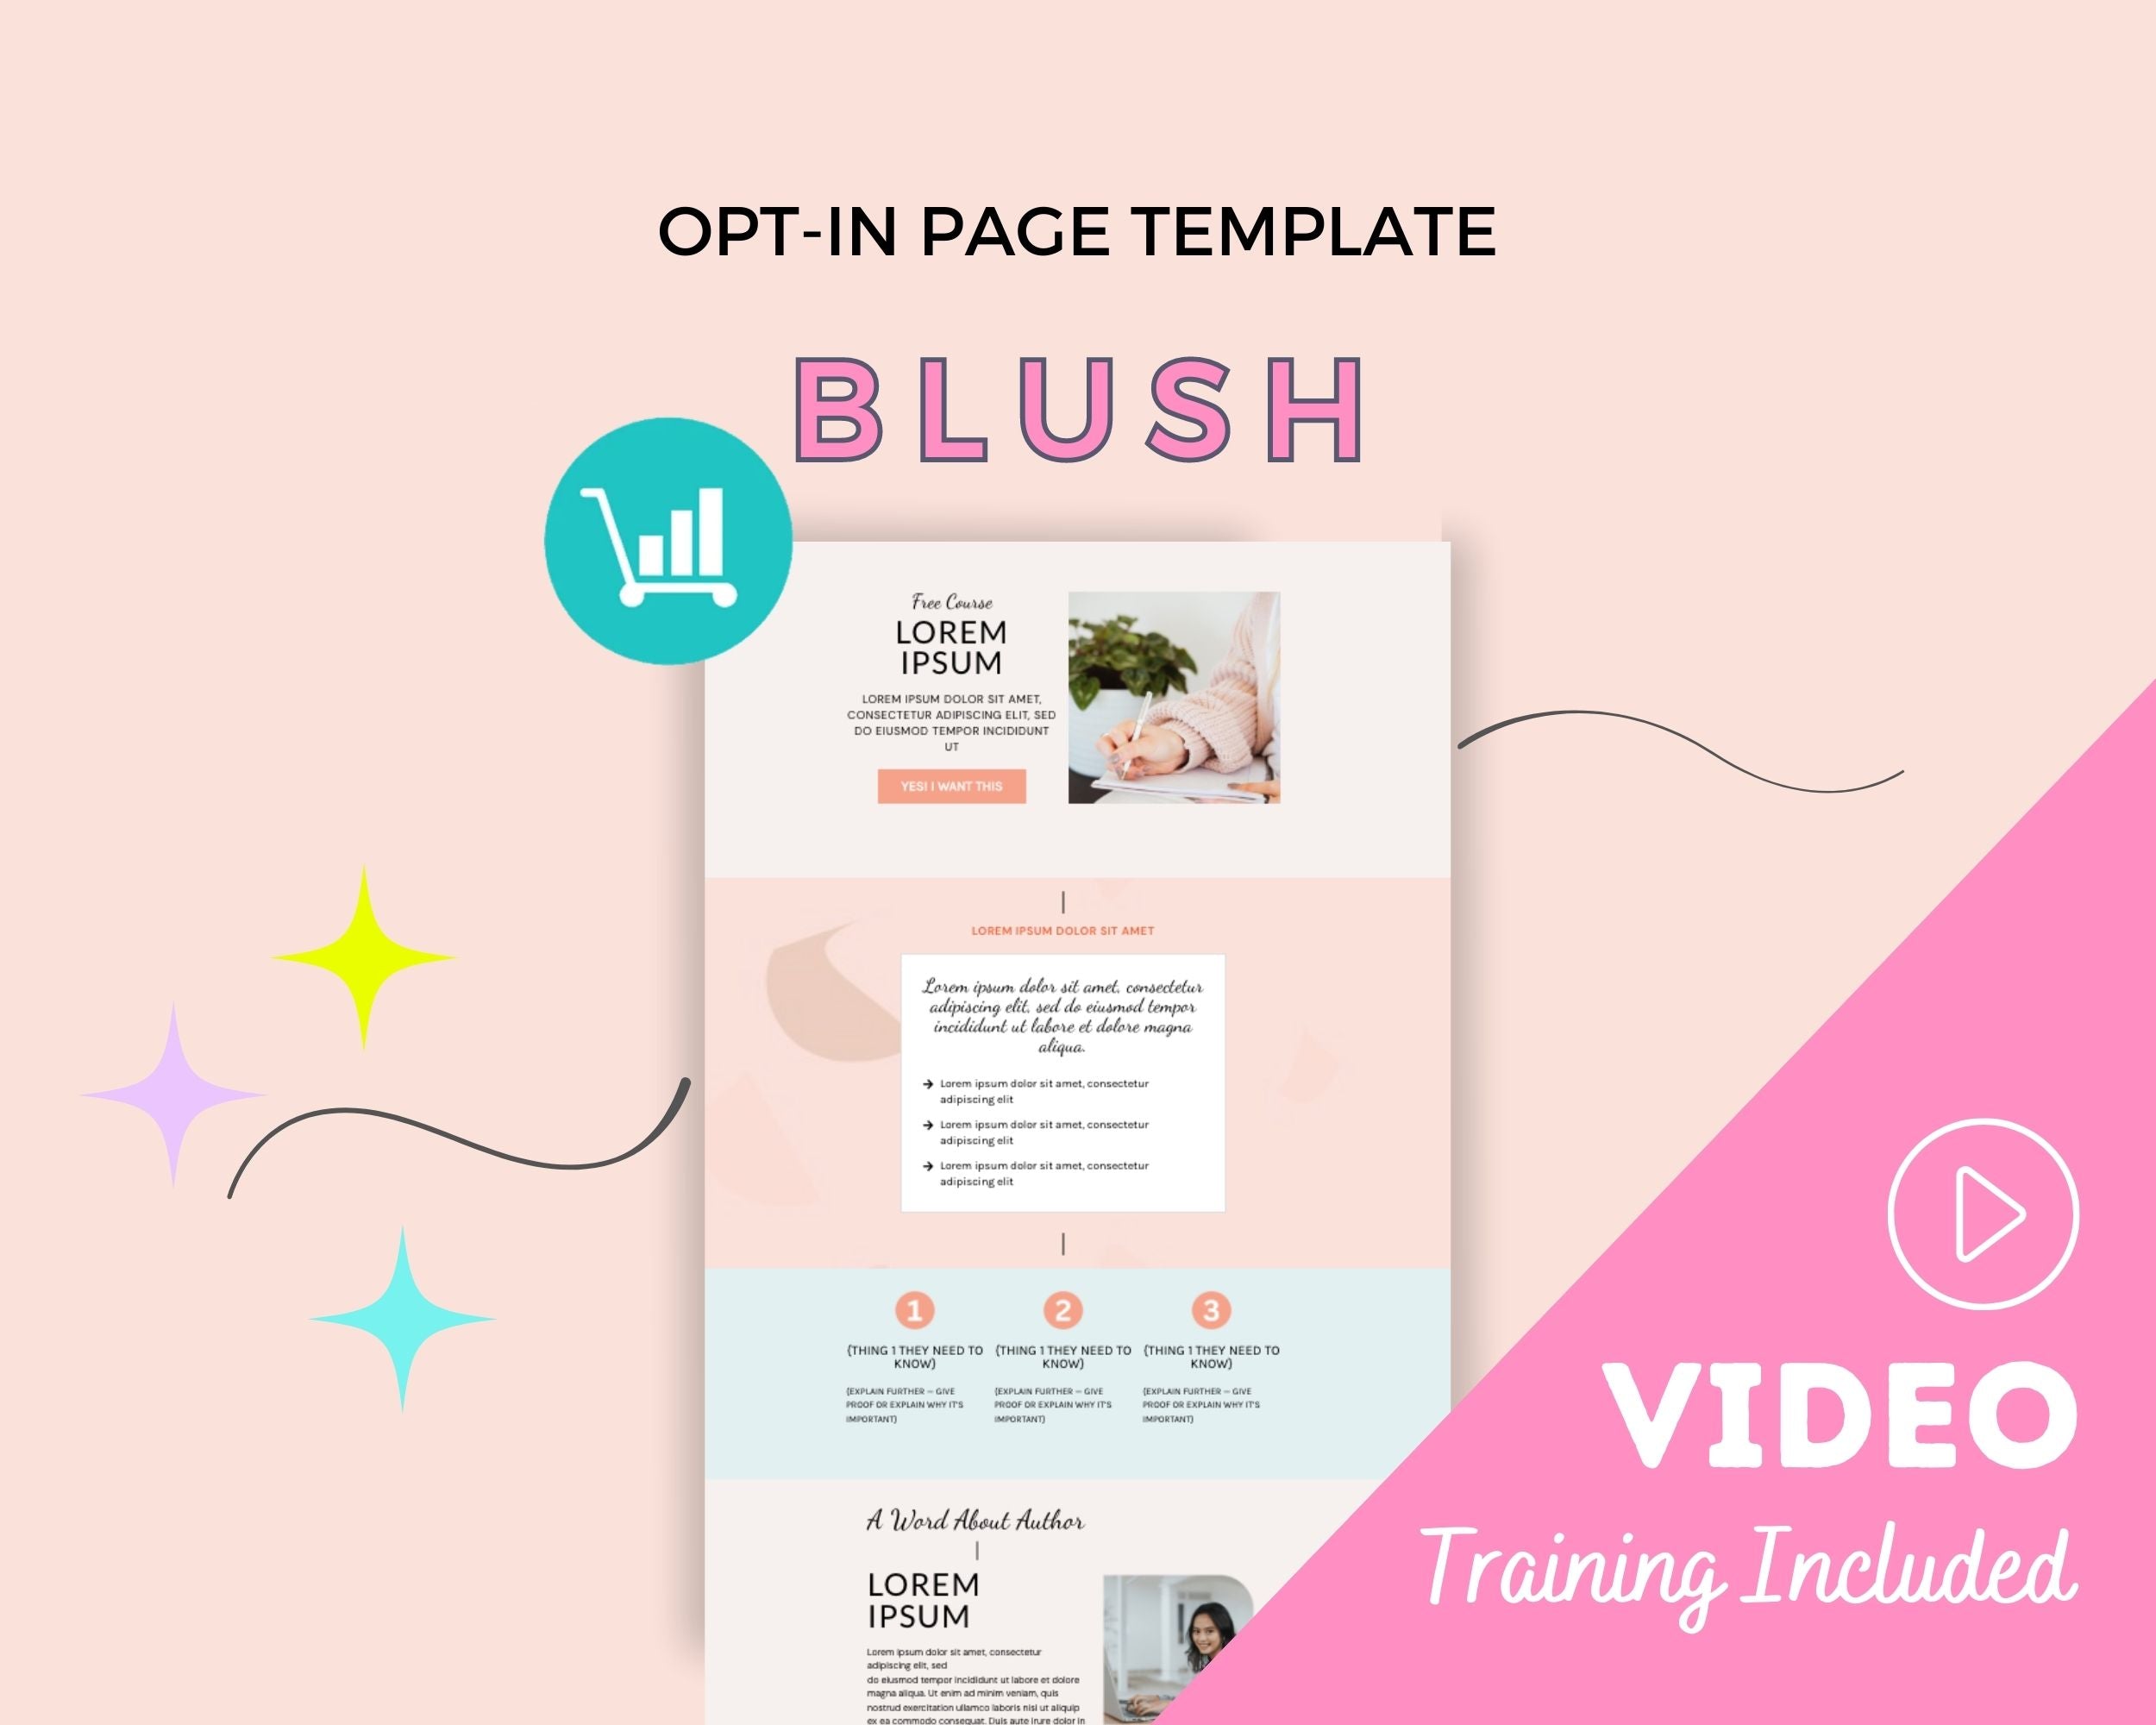 Blush ThriveCart Opt-In Page Template